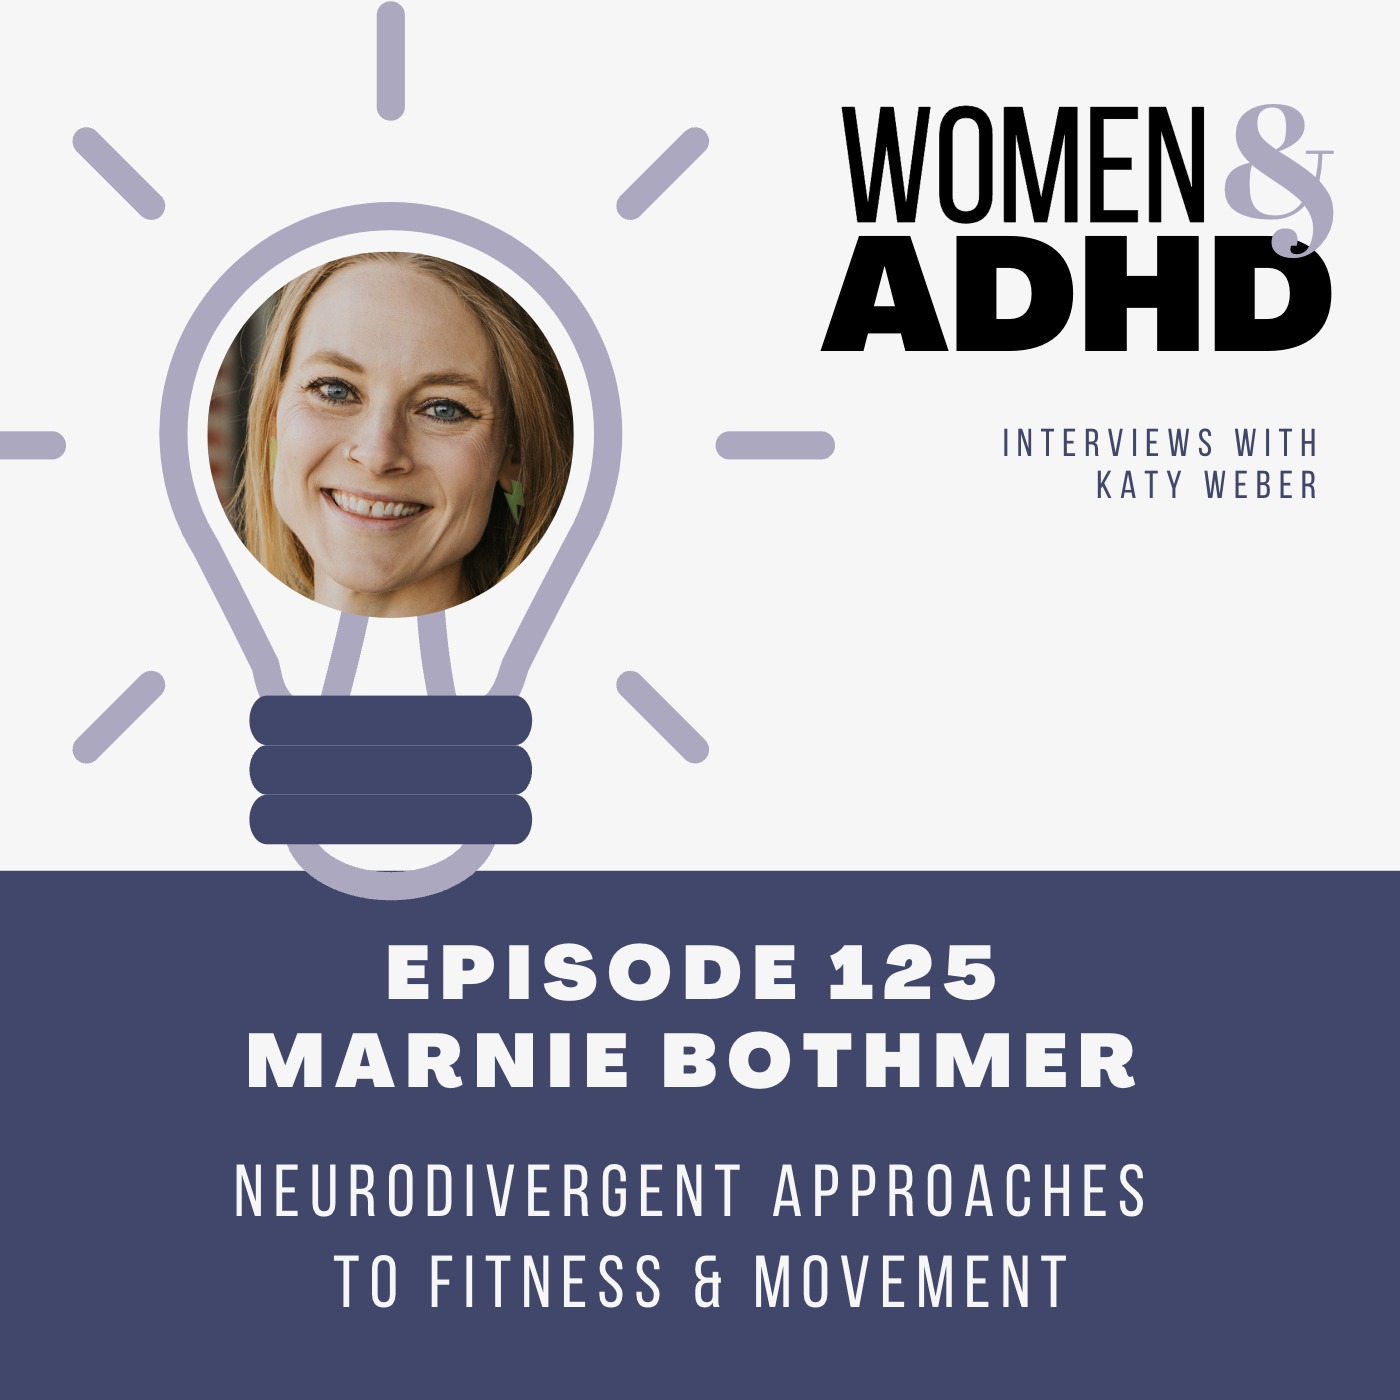 Marnie Bothmer: Neurodivergent approaches to fitness & movement